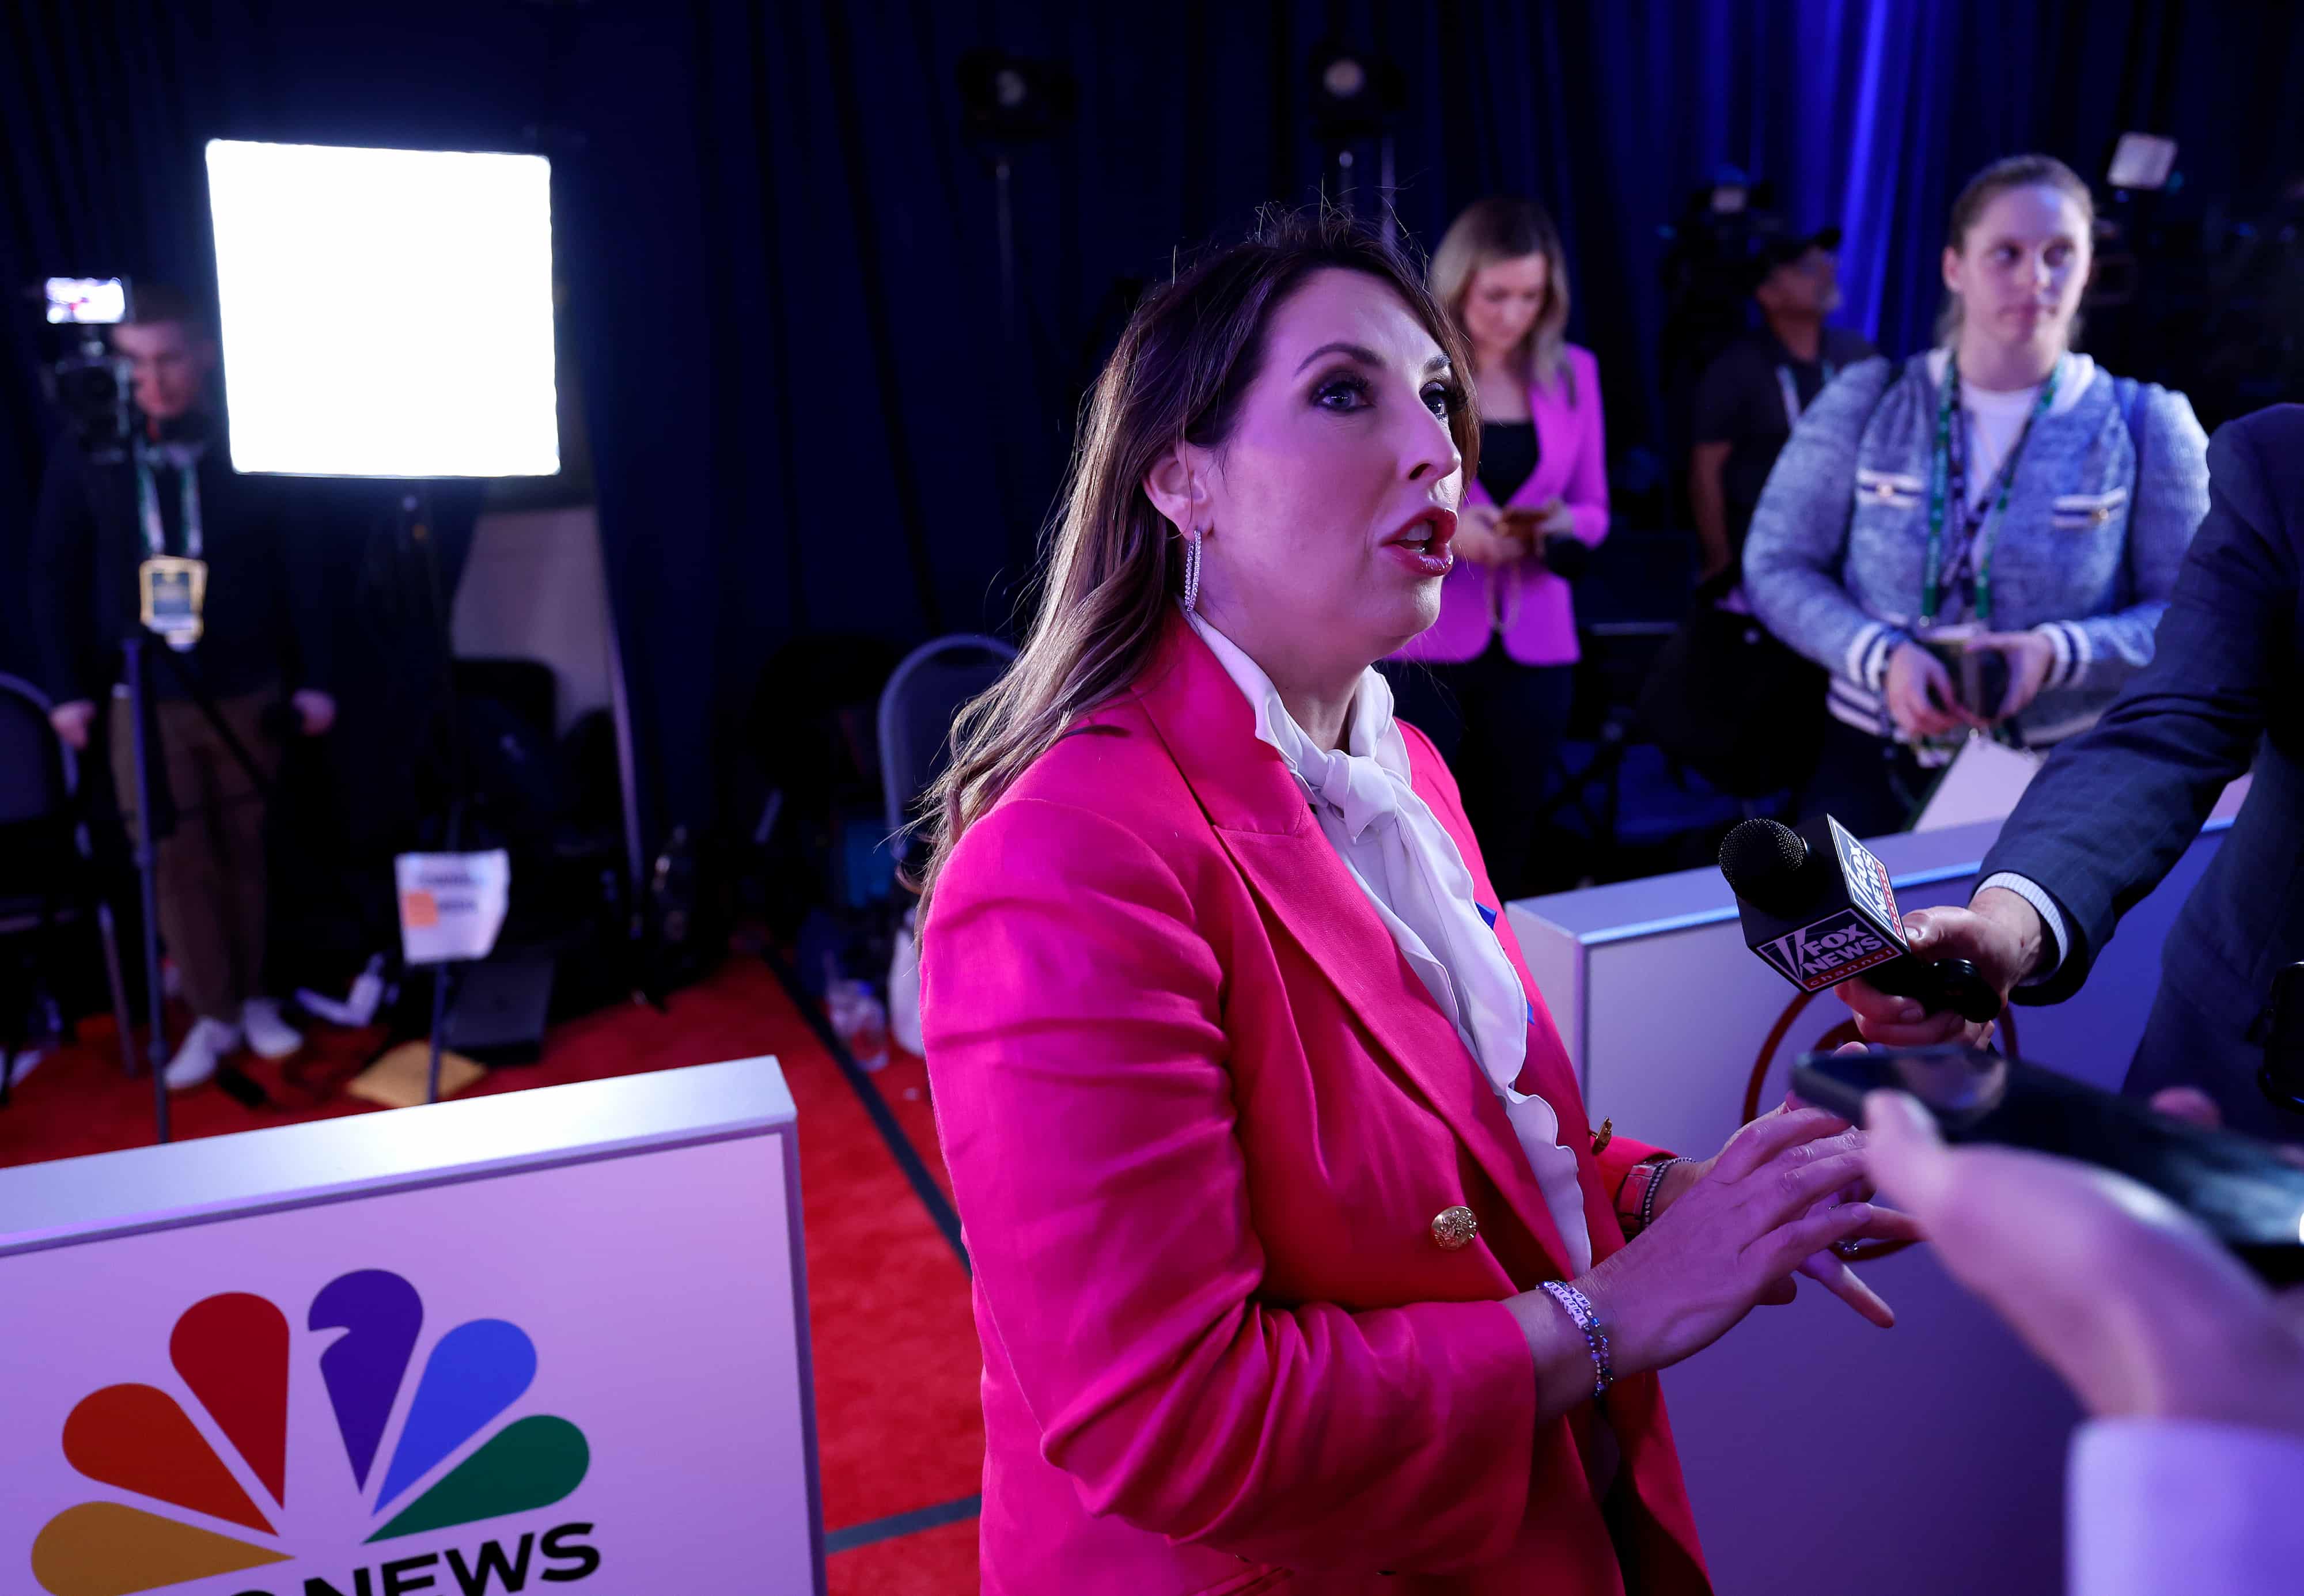 Ronna McDaniel Out at NBC After Anchors Object to Hiring